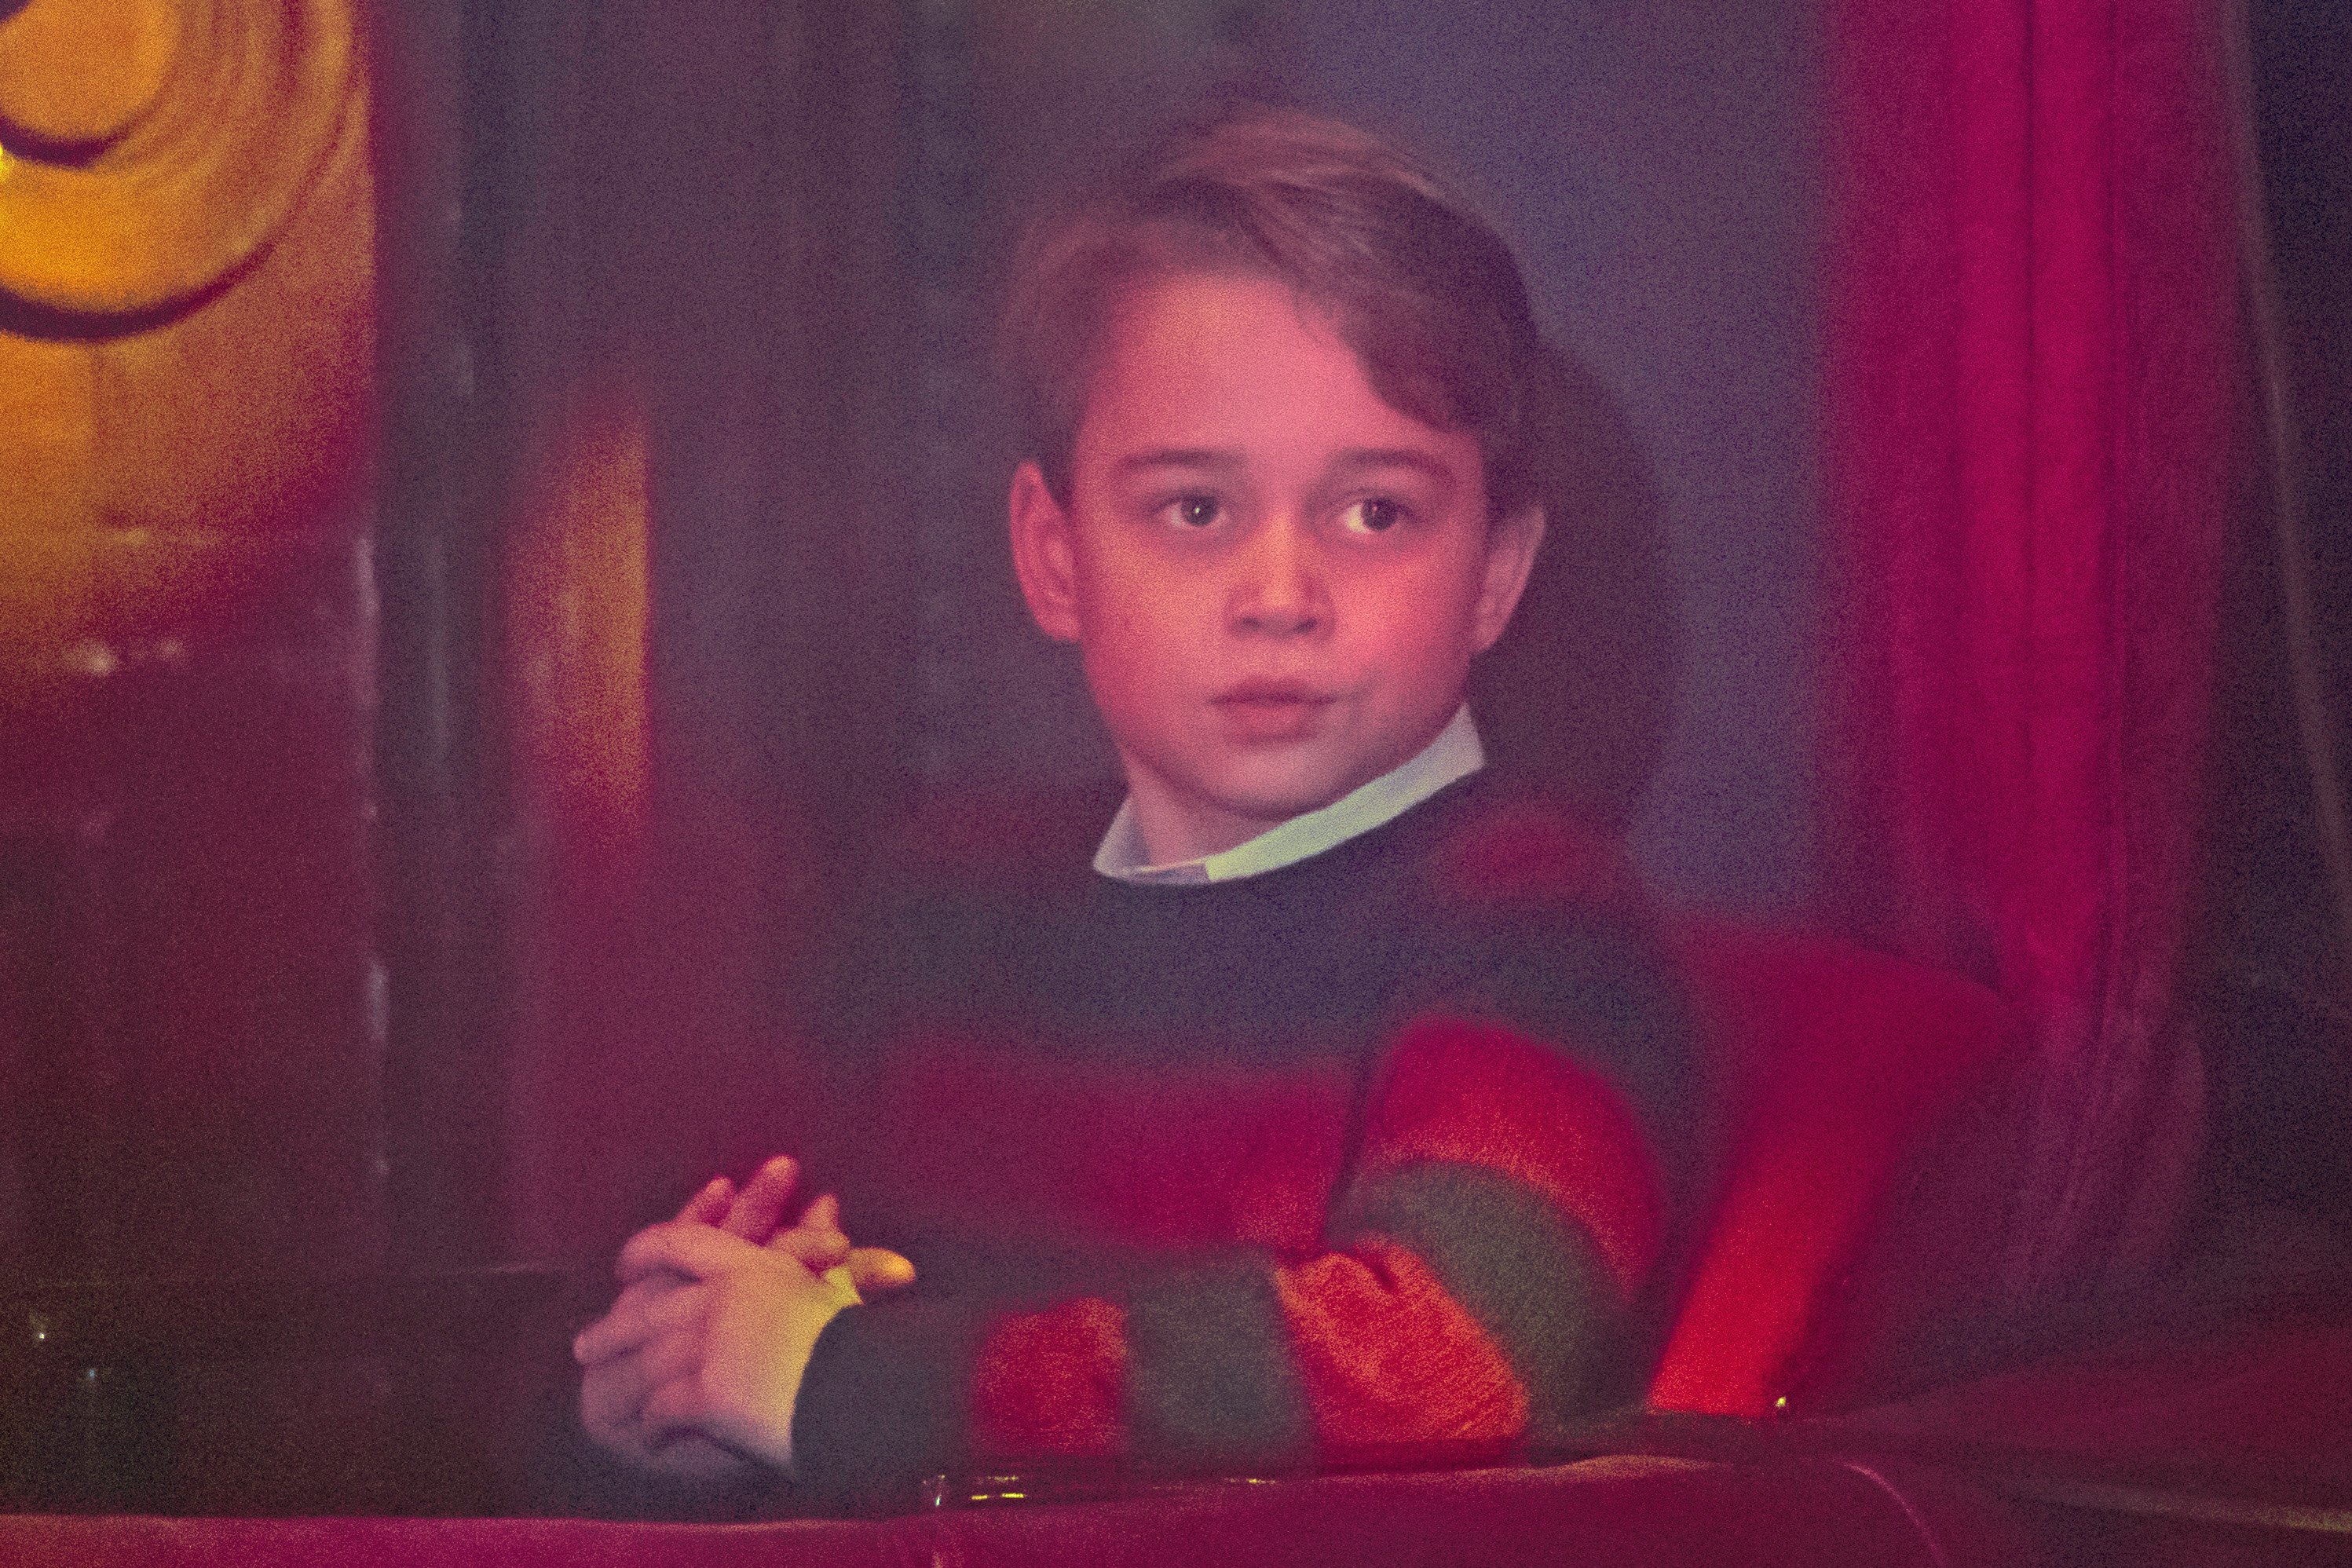 Prince George attends a special pantomime performance at London's Palladium Theatre